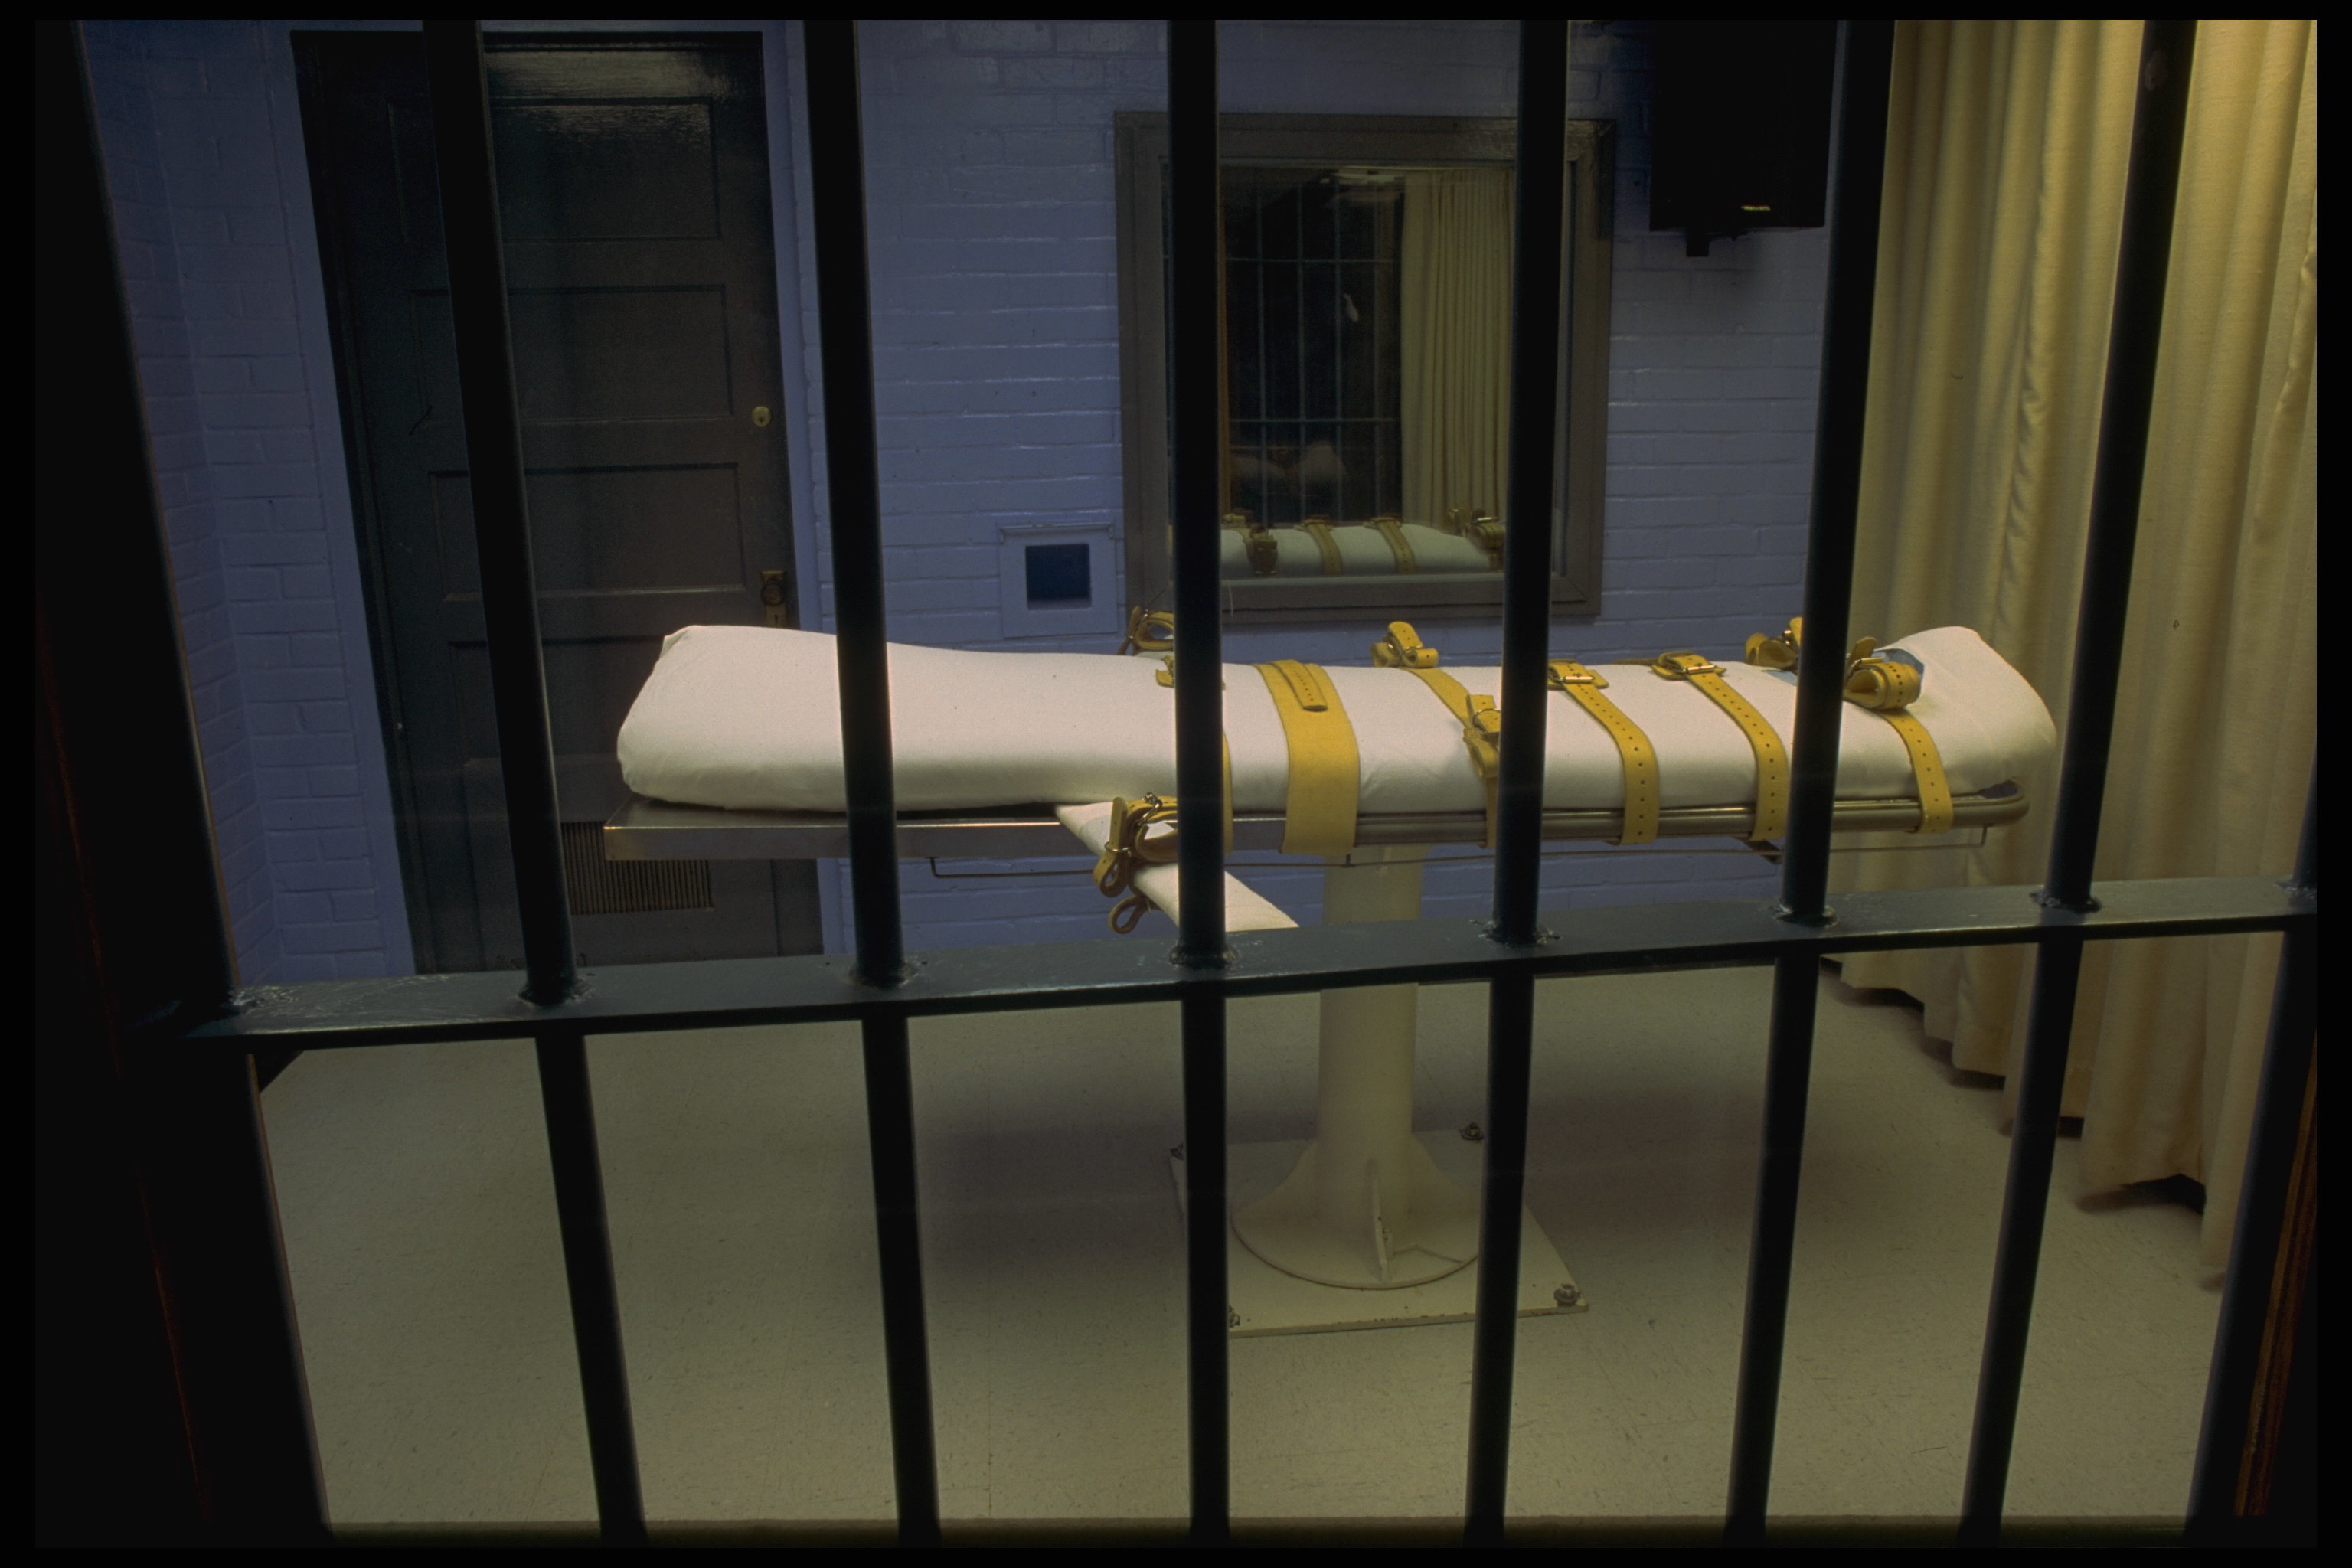 Black People Experienced Botched Lethal Injections At Higher Rates, New Study Finds